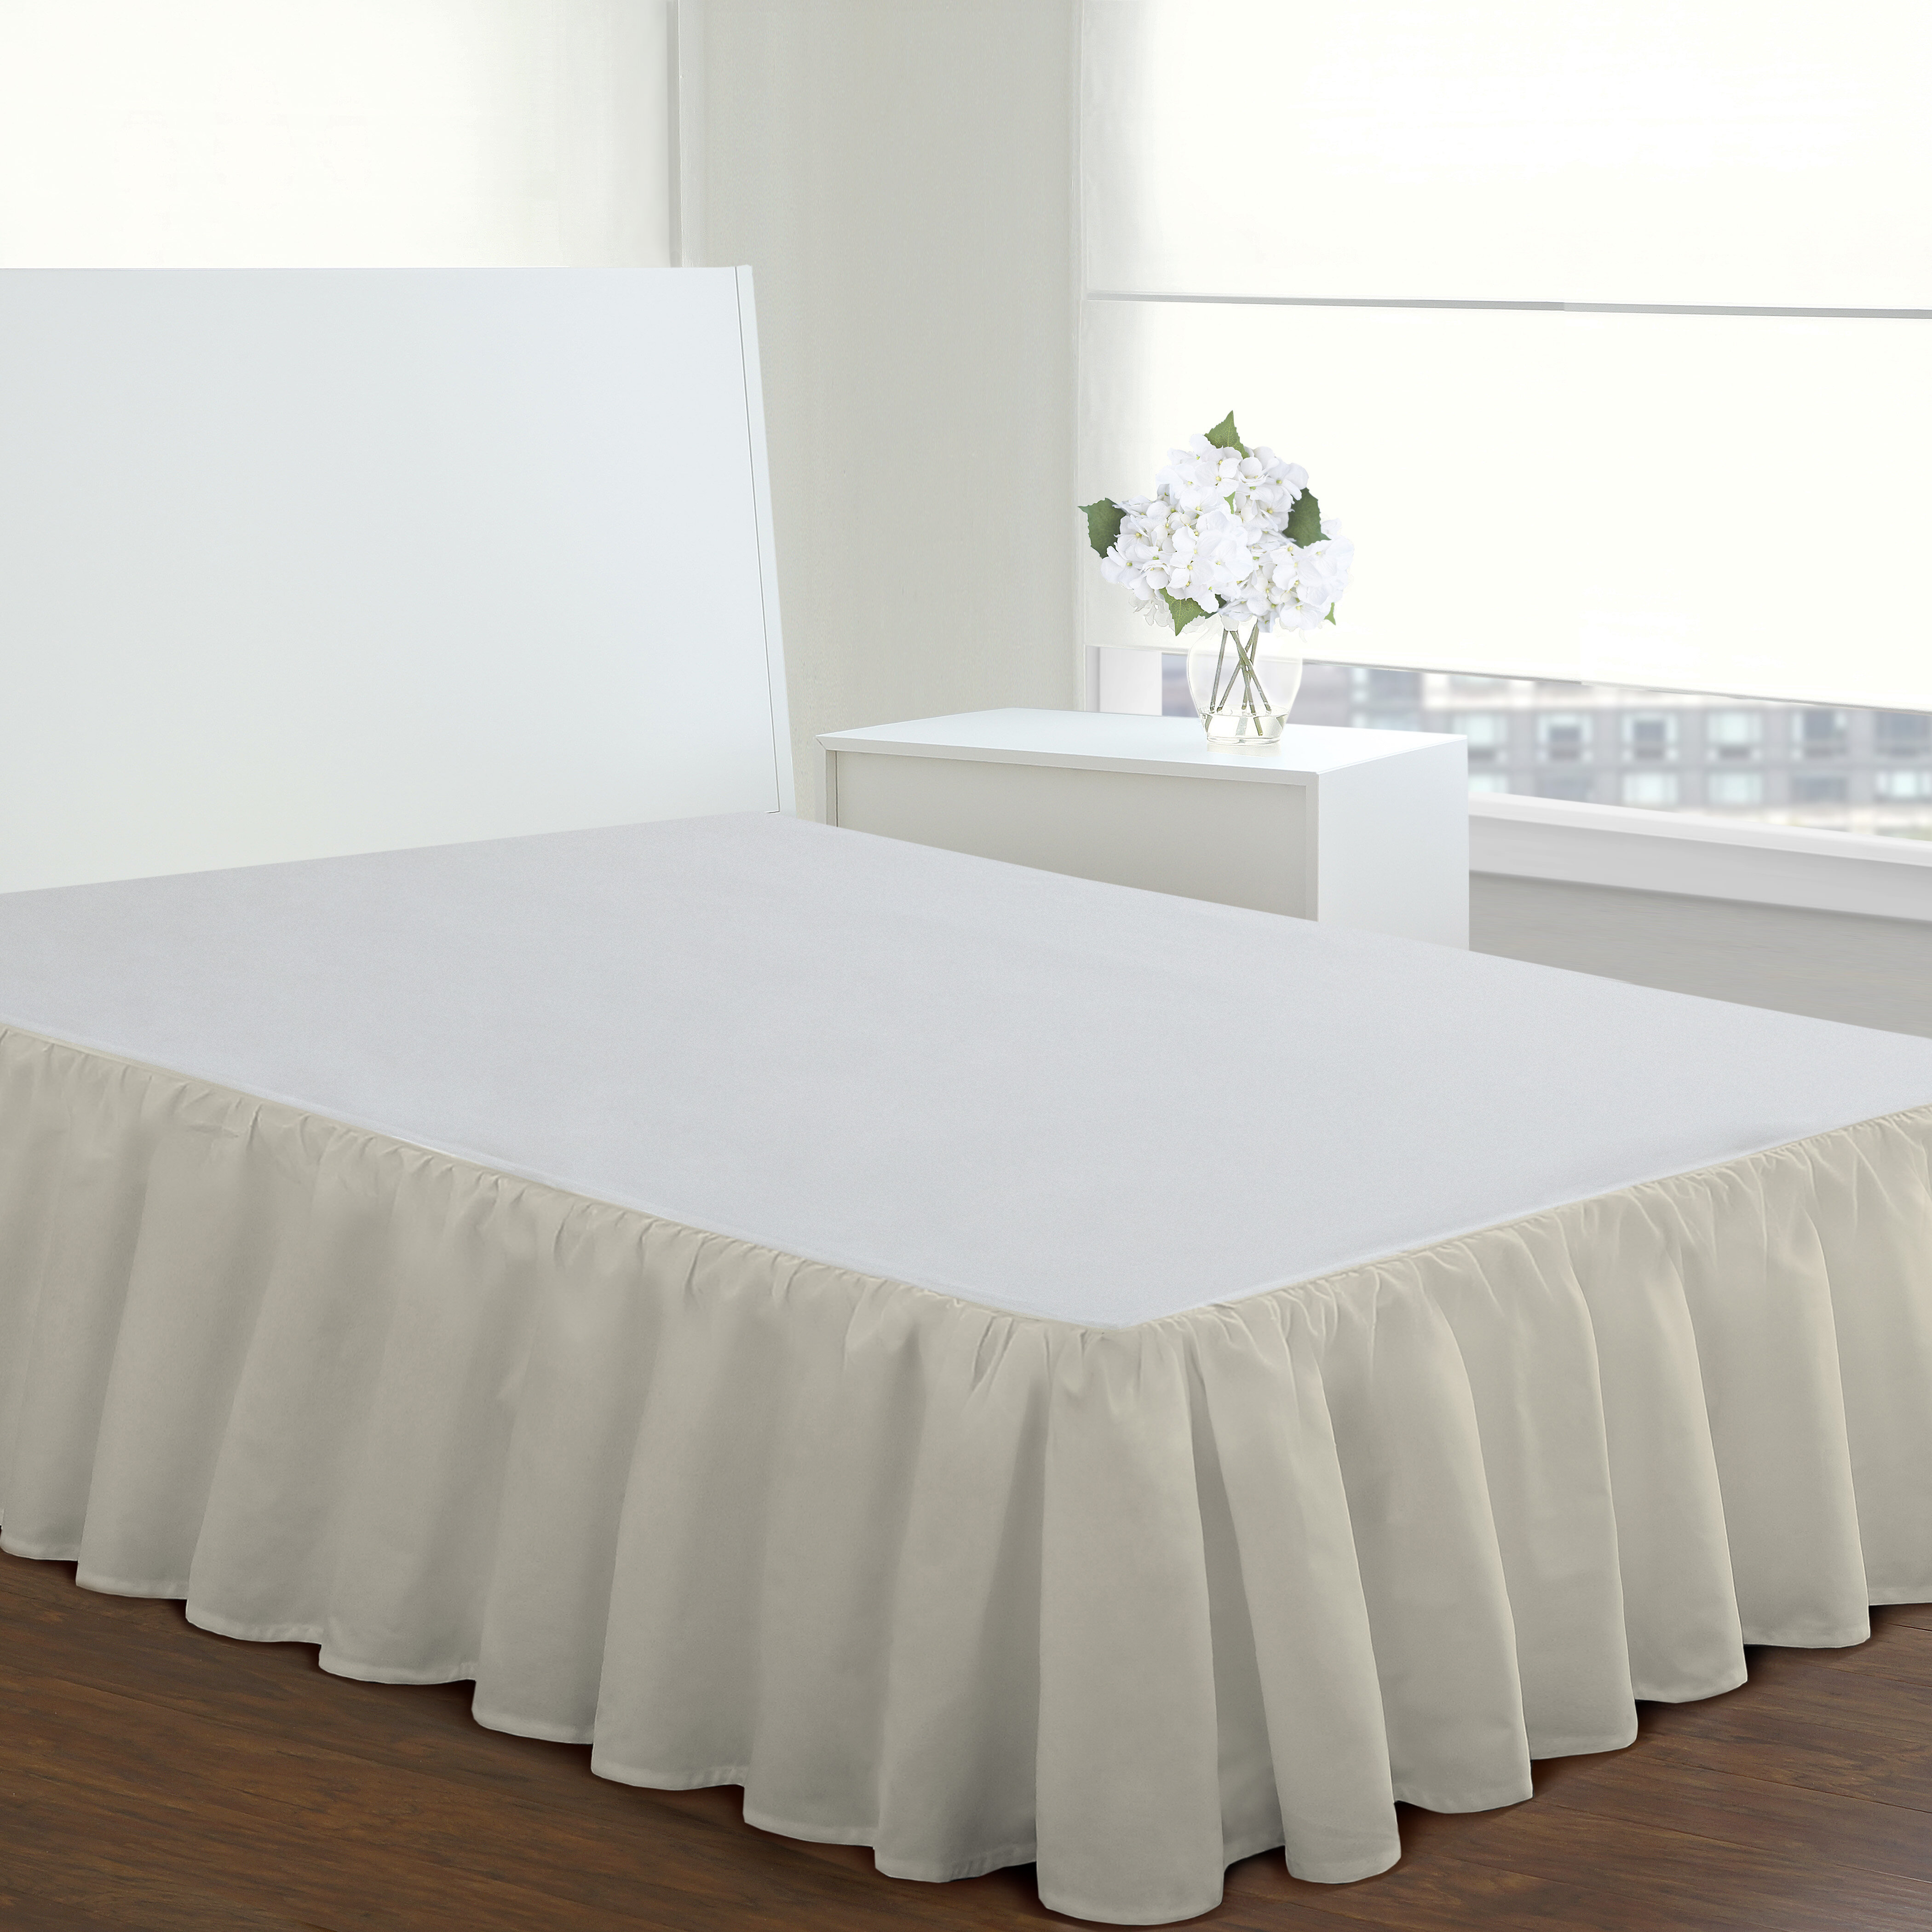 Wrinkle Free Super Soft Eyelet Lace Cotton 400 Thread Count Bed Skirt 